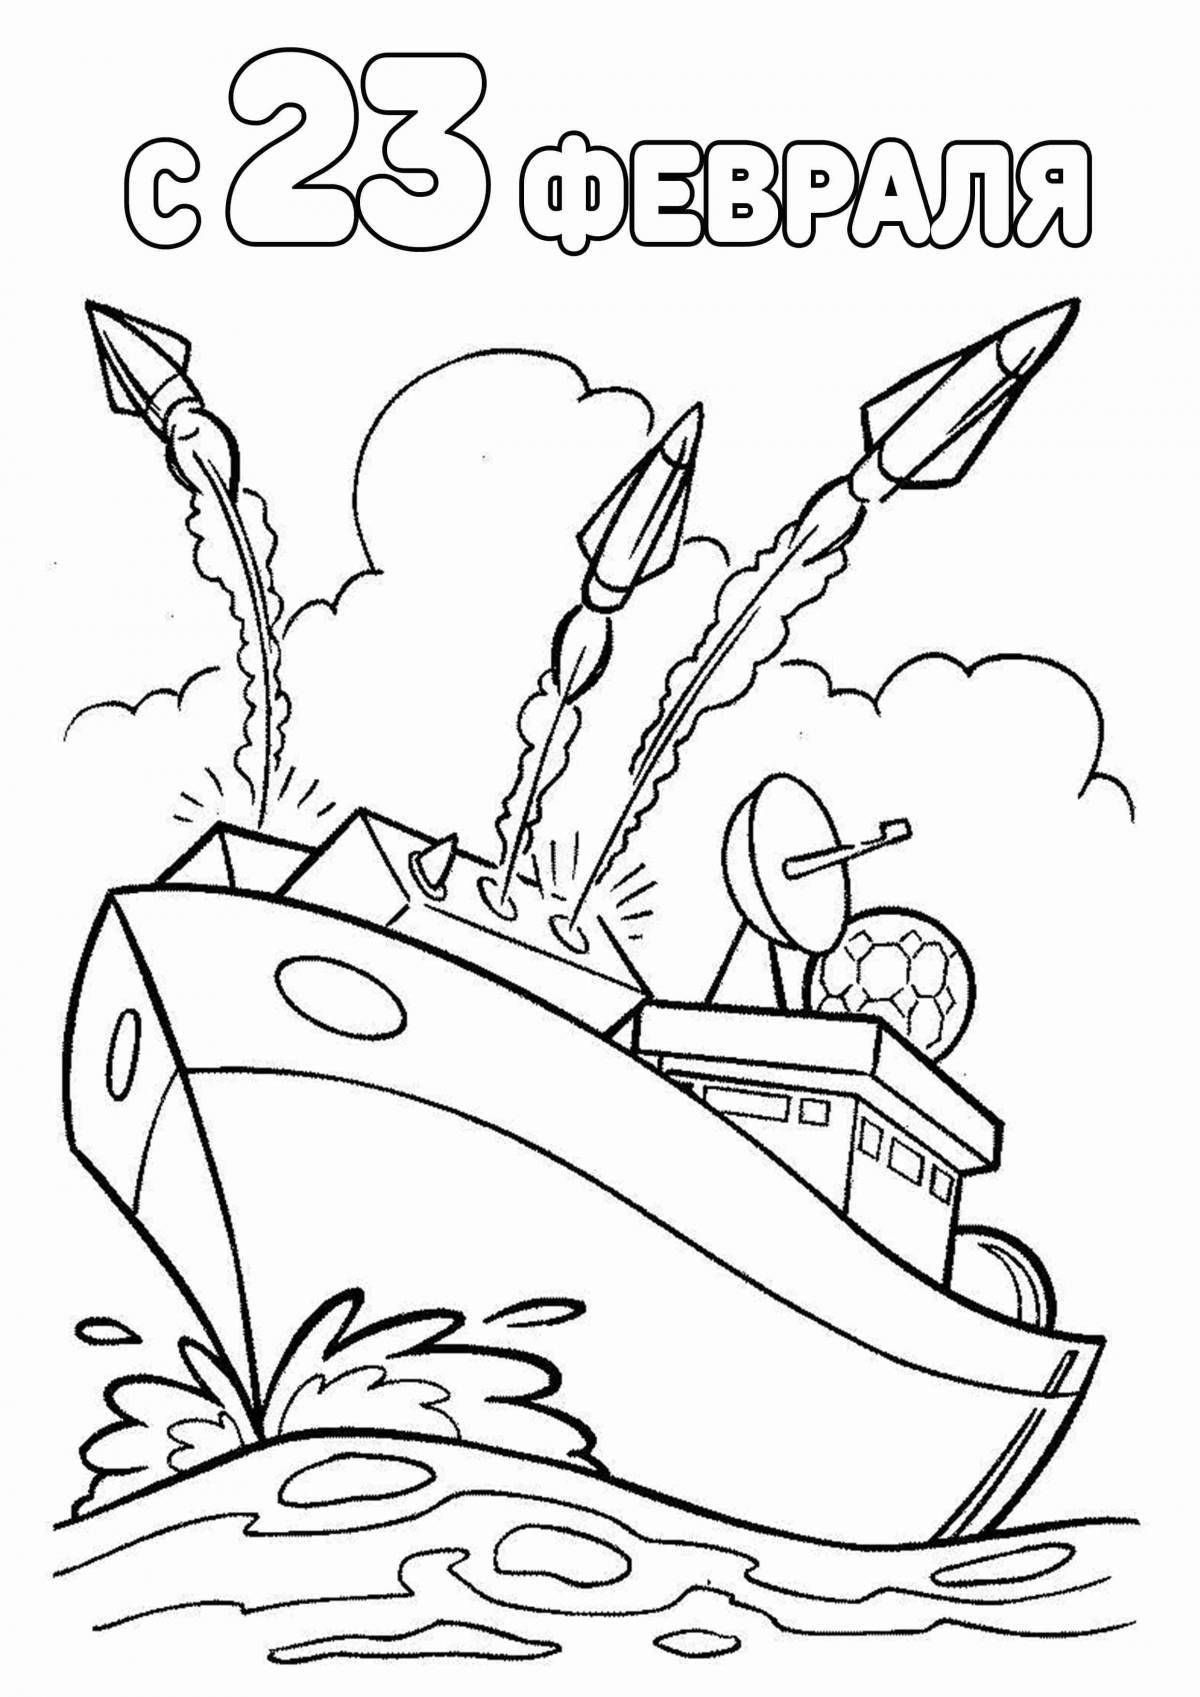 Awesome Defender's Day coloring book